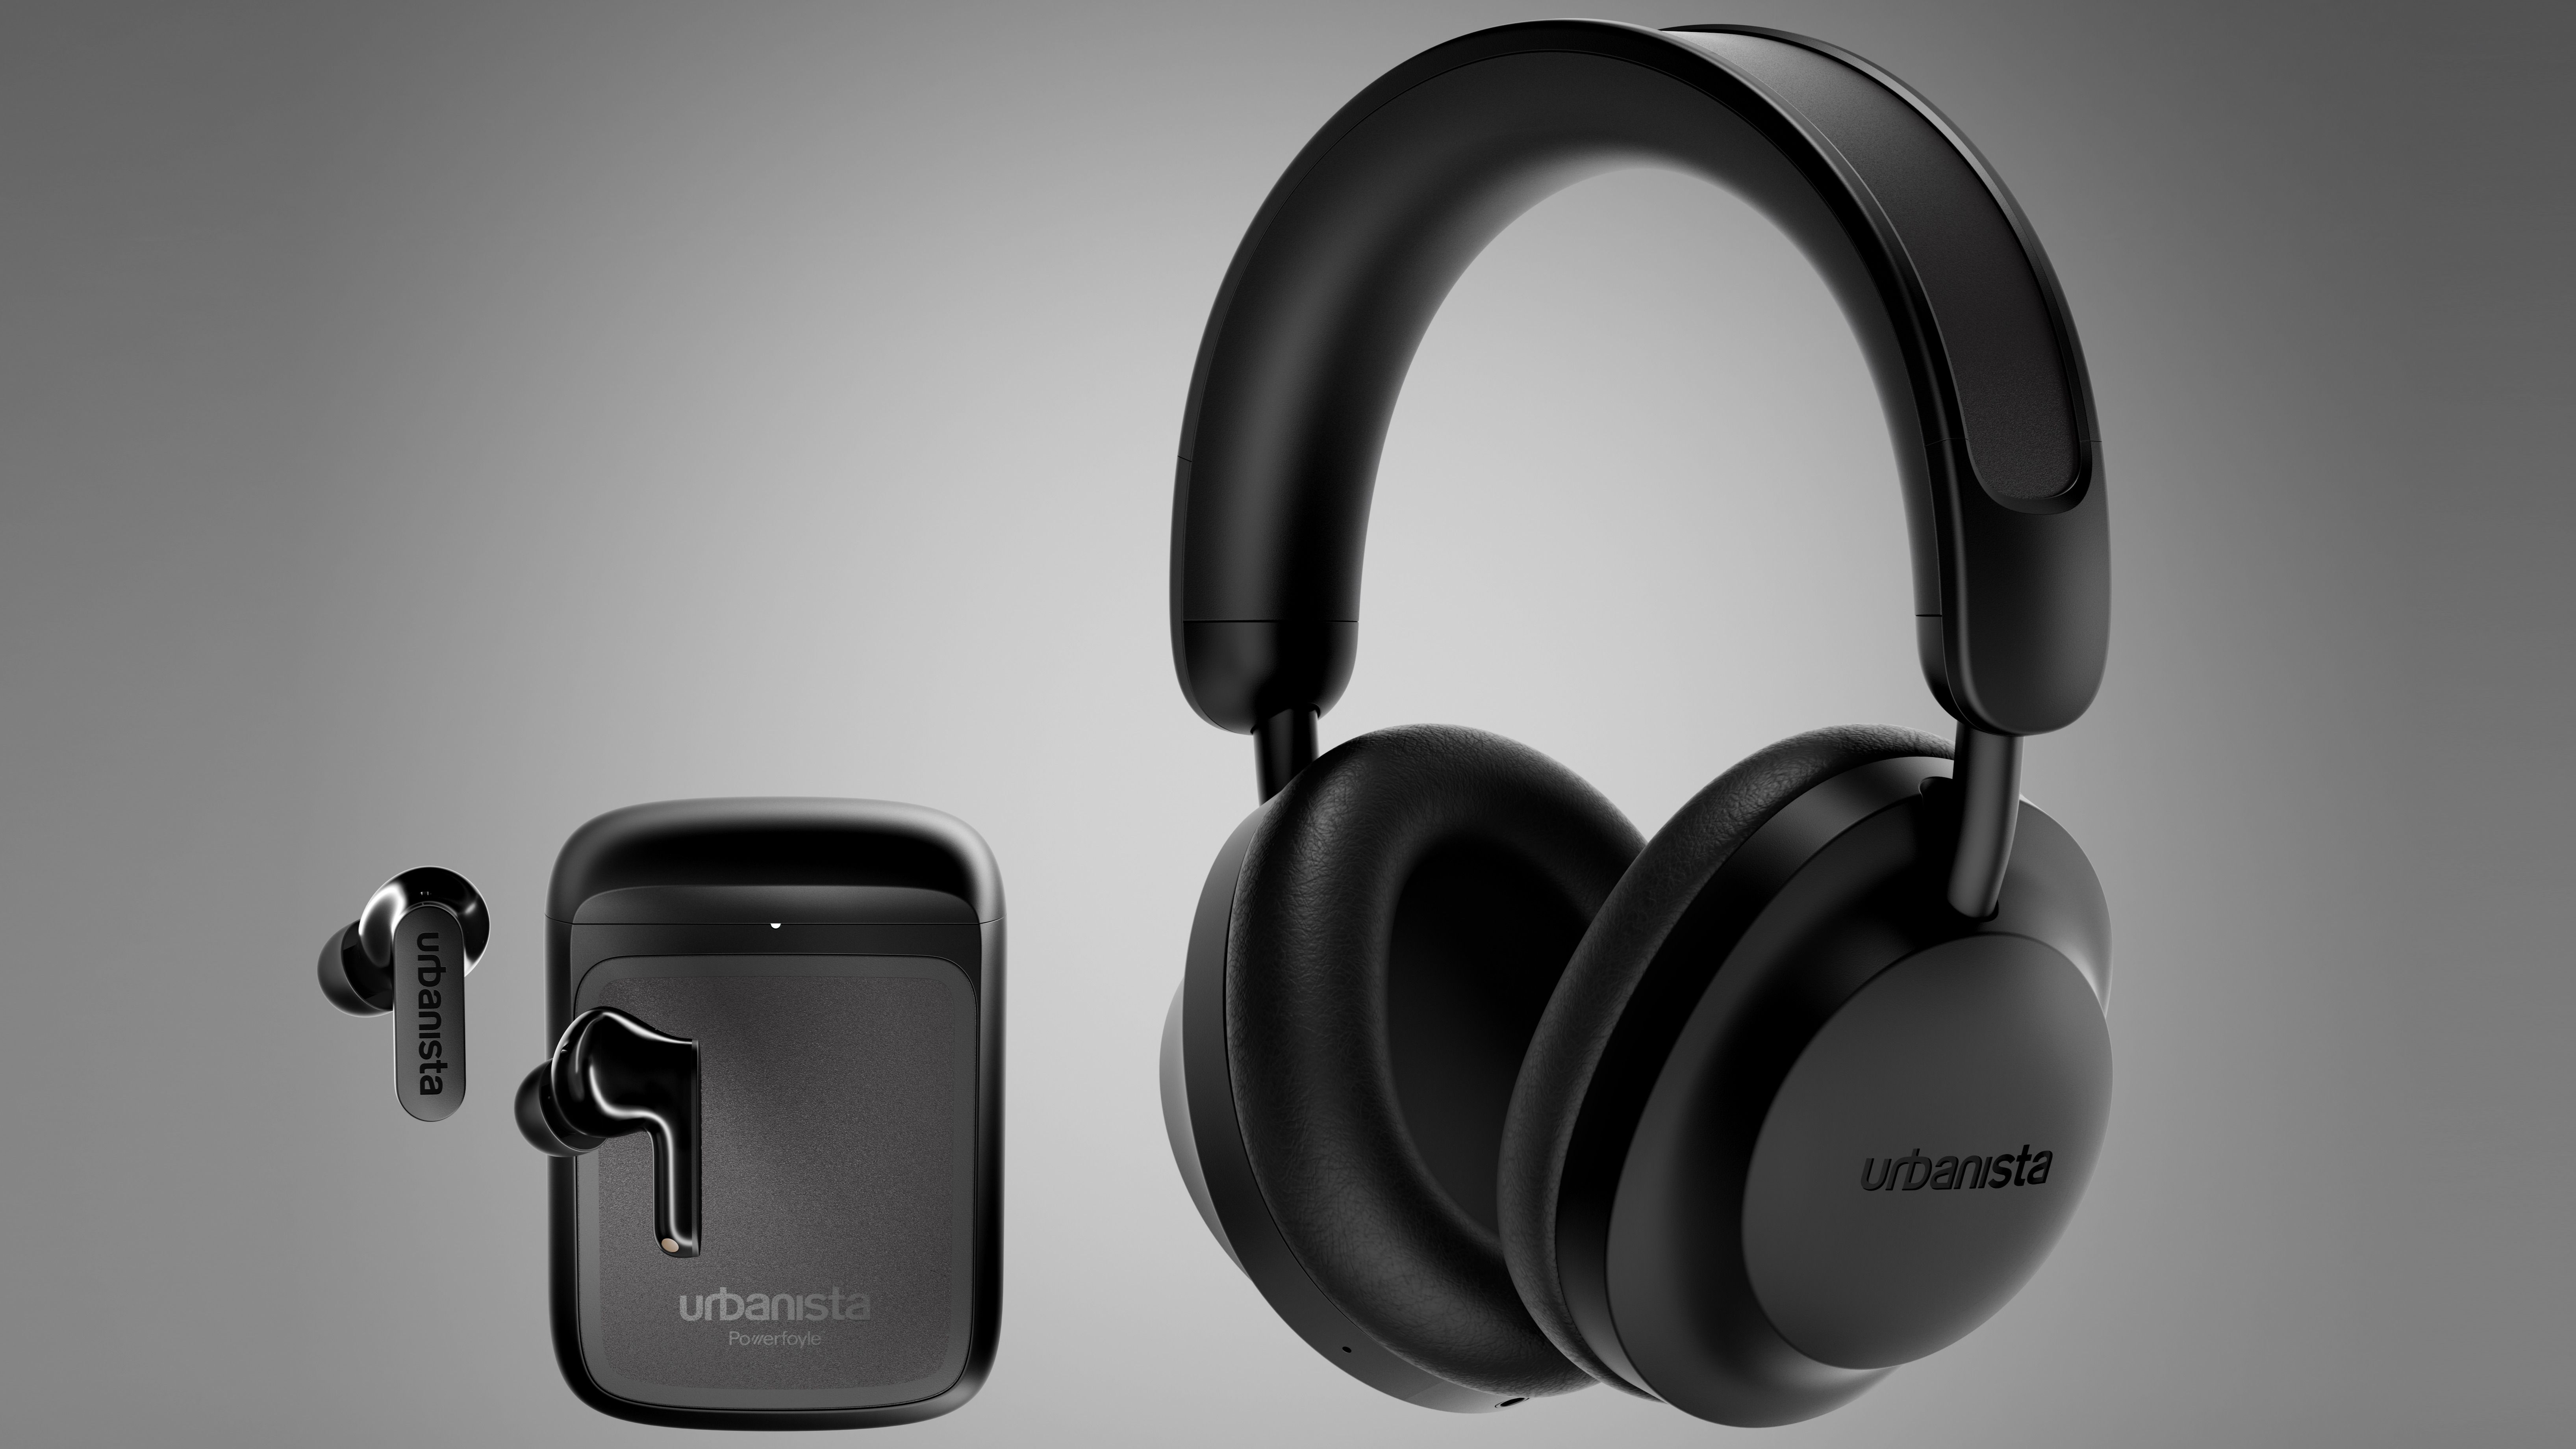 A photo of Urbanista headphones and earbuds